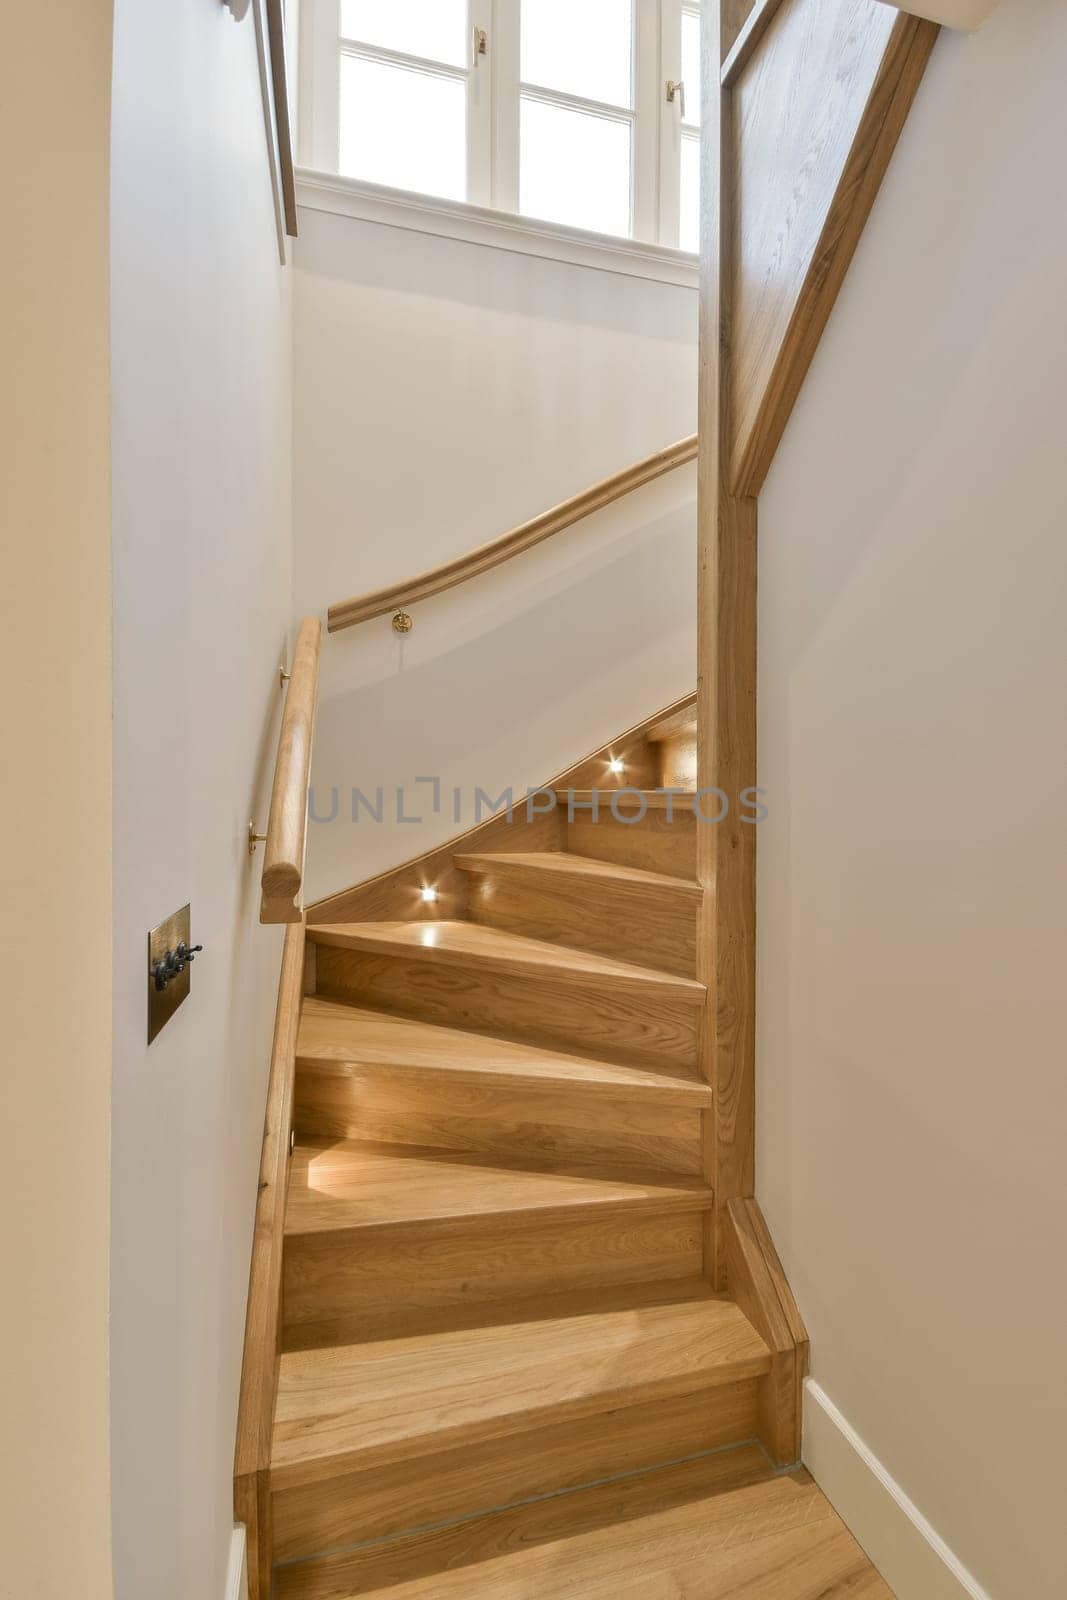 a wooden staircase leading up to the second floor in a home with white walls and light wood handrails